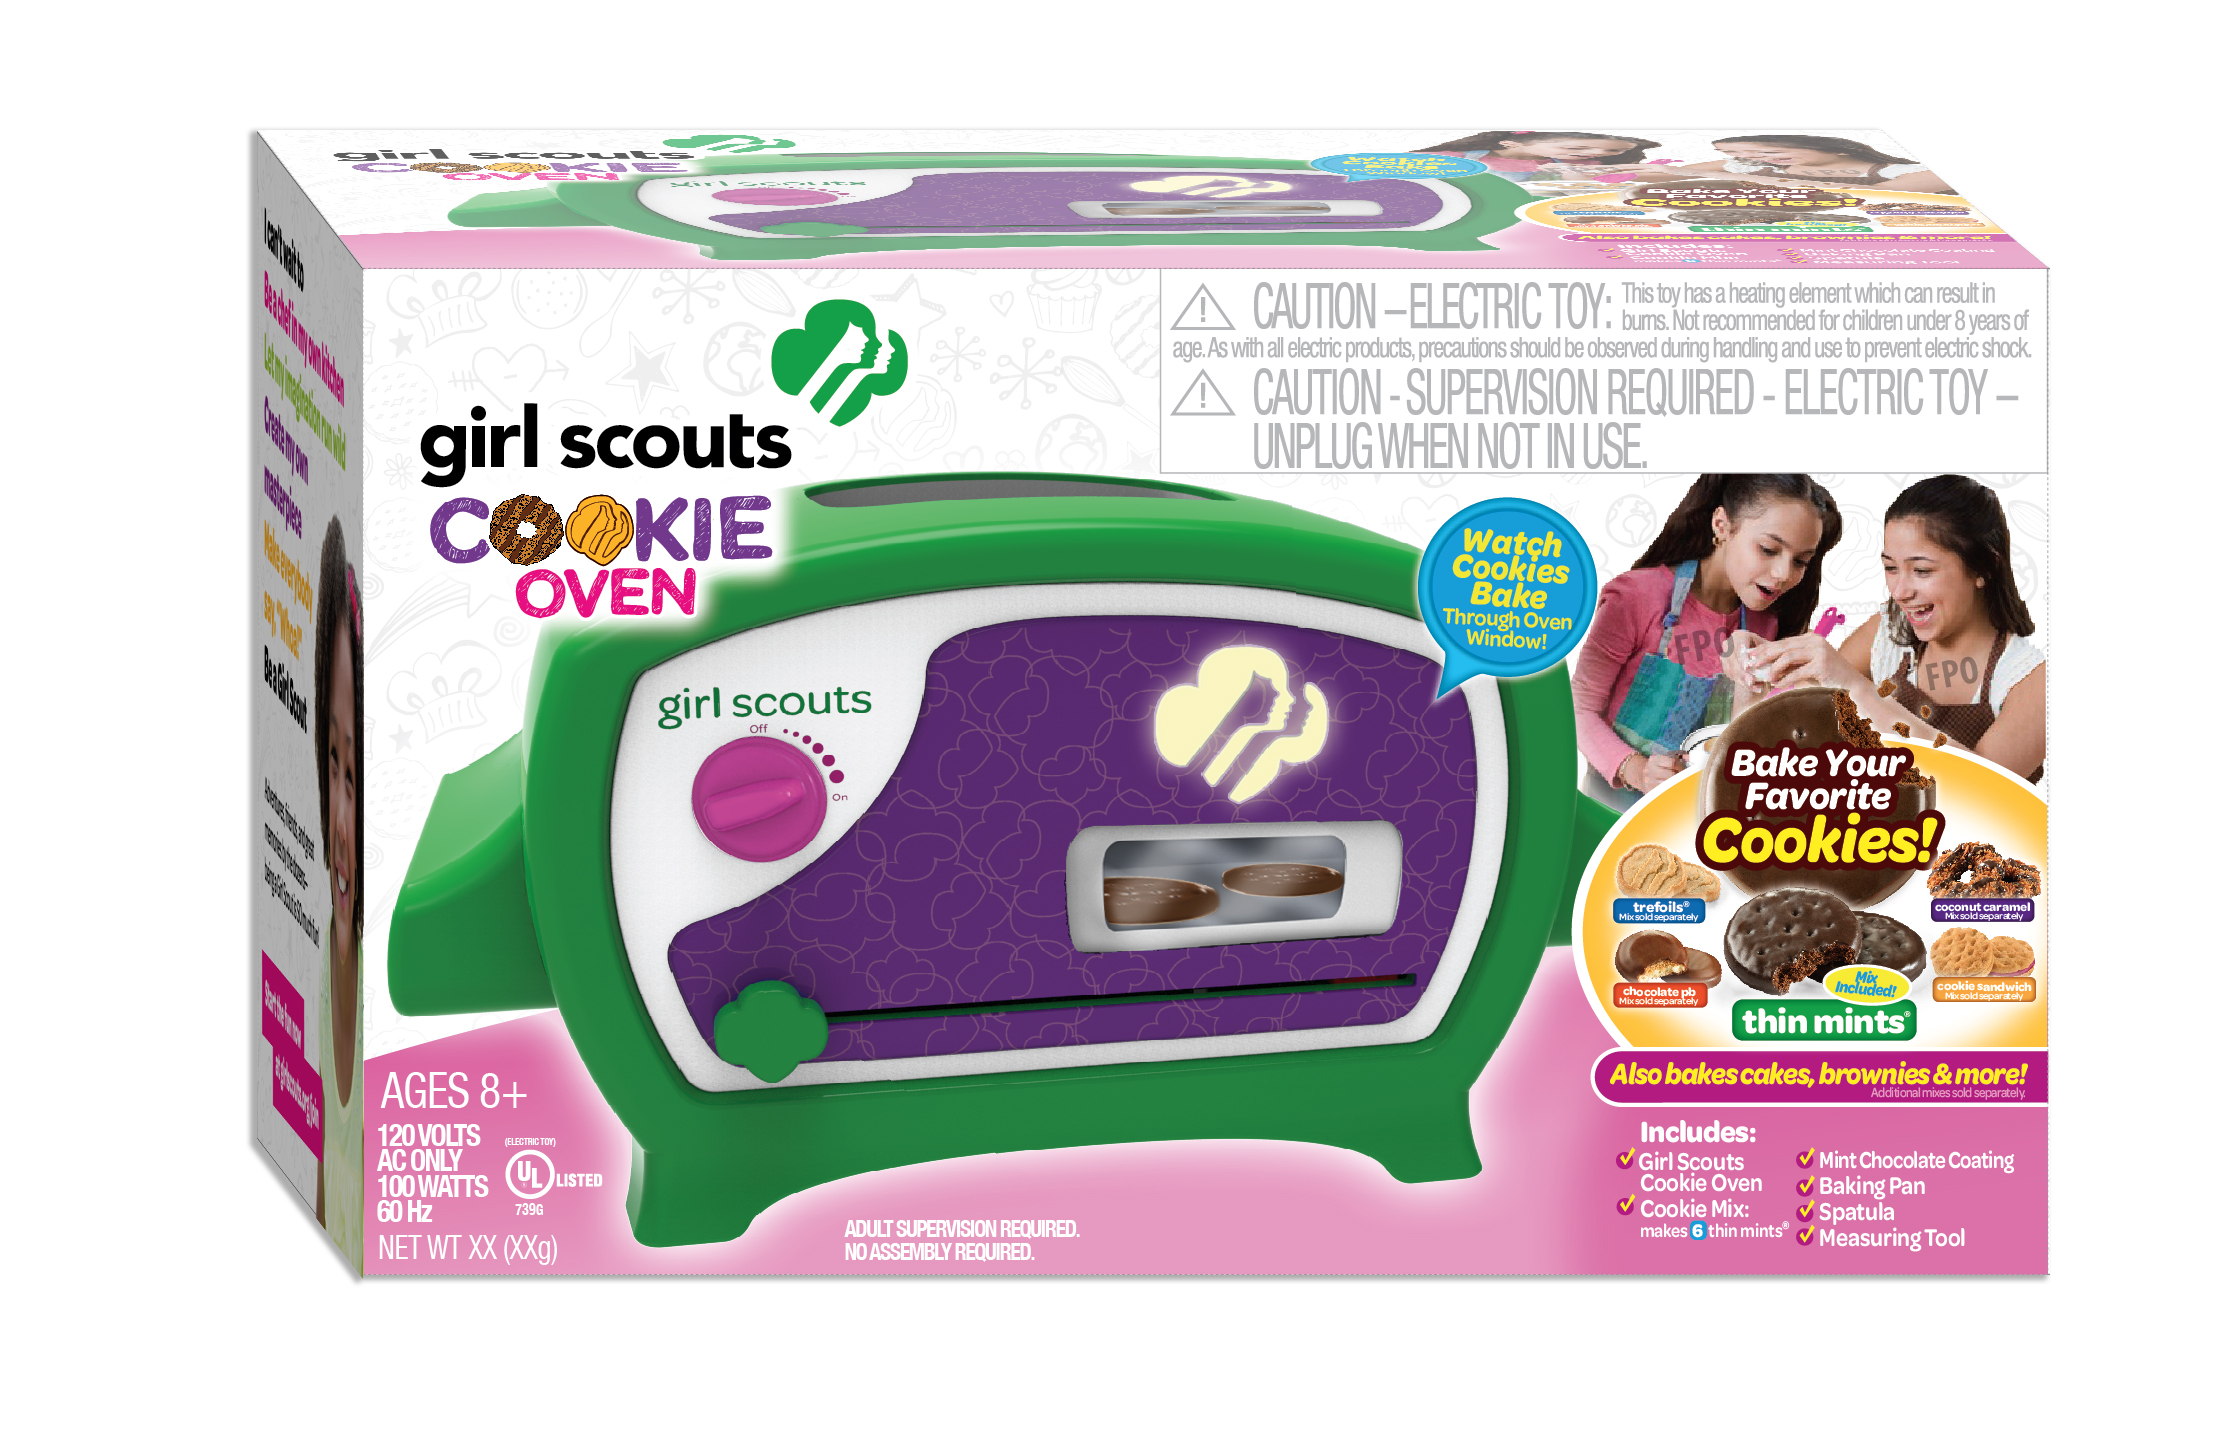 PHOTO: Girl Scout Cookie Oven by Wicked Cool Toys earns a spot on the list of top holiday toys.